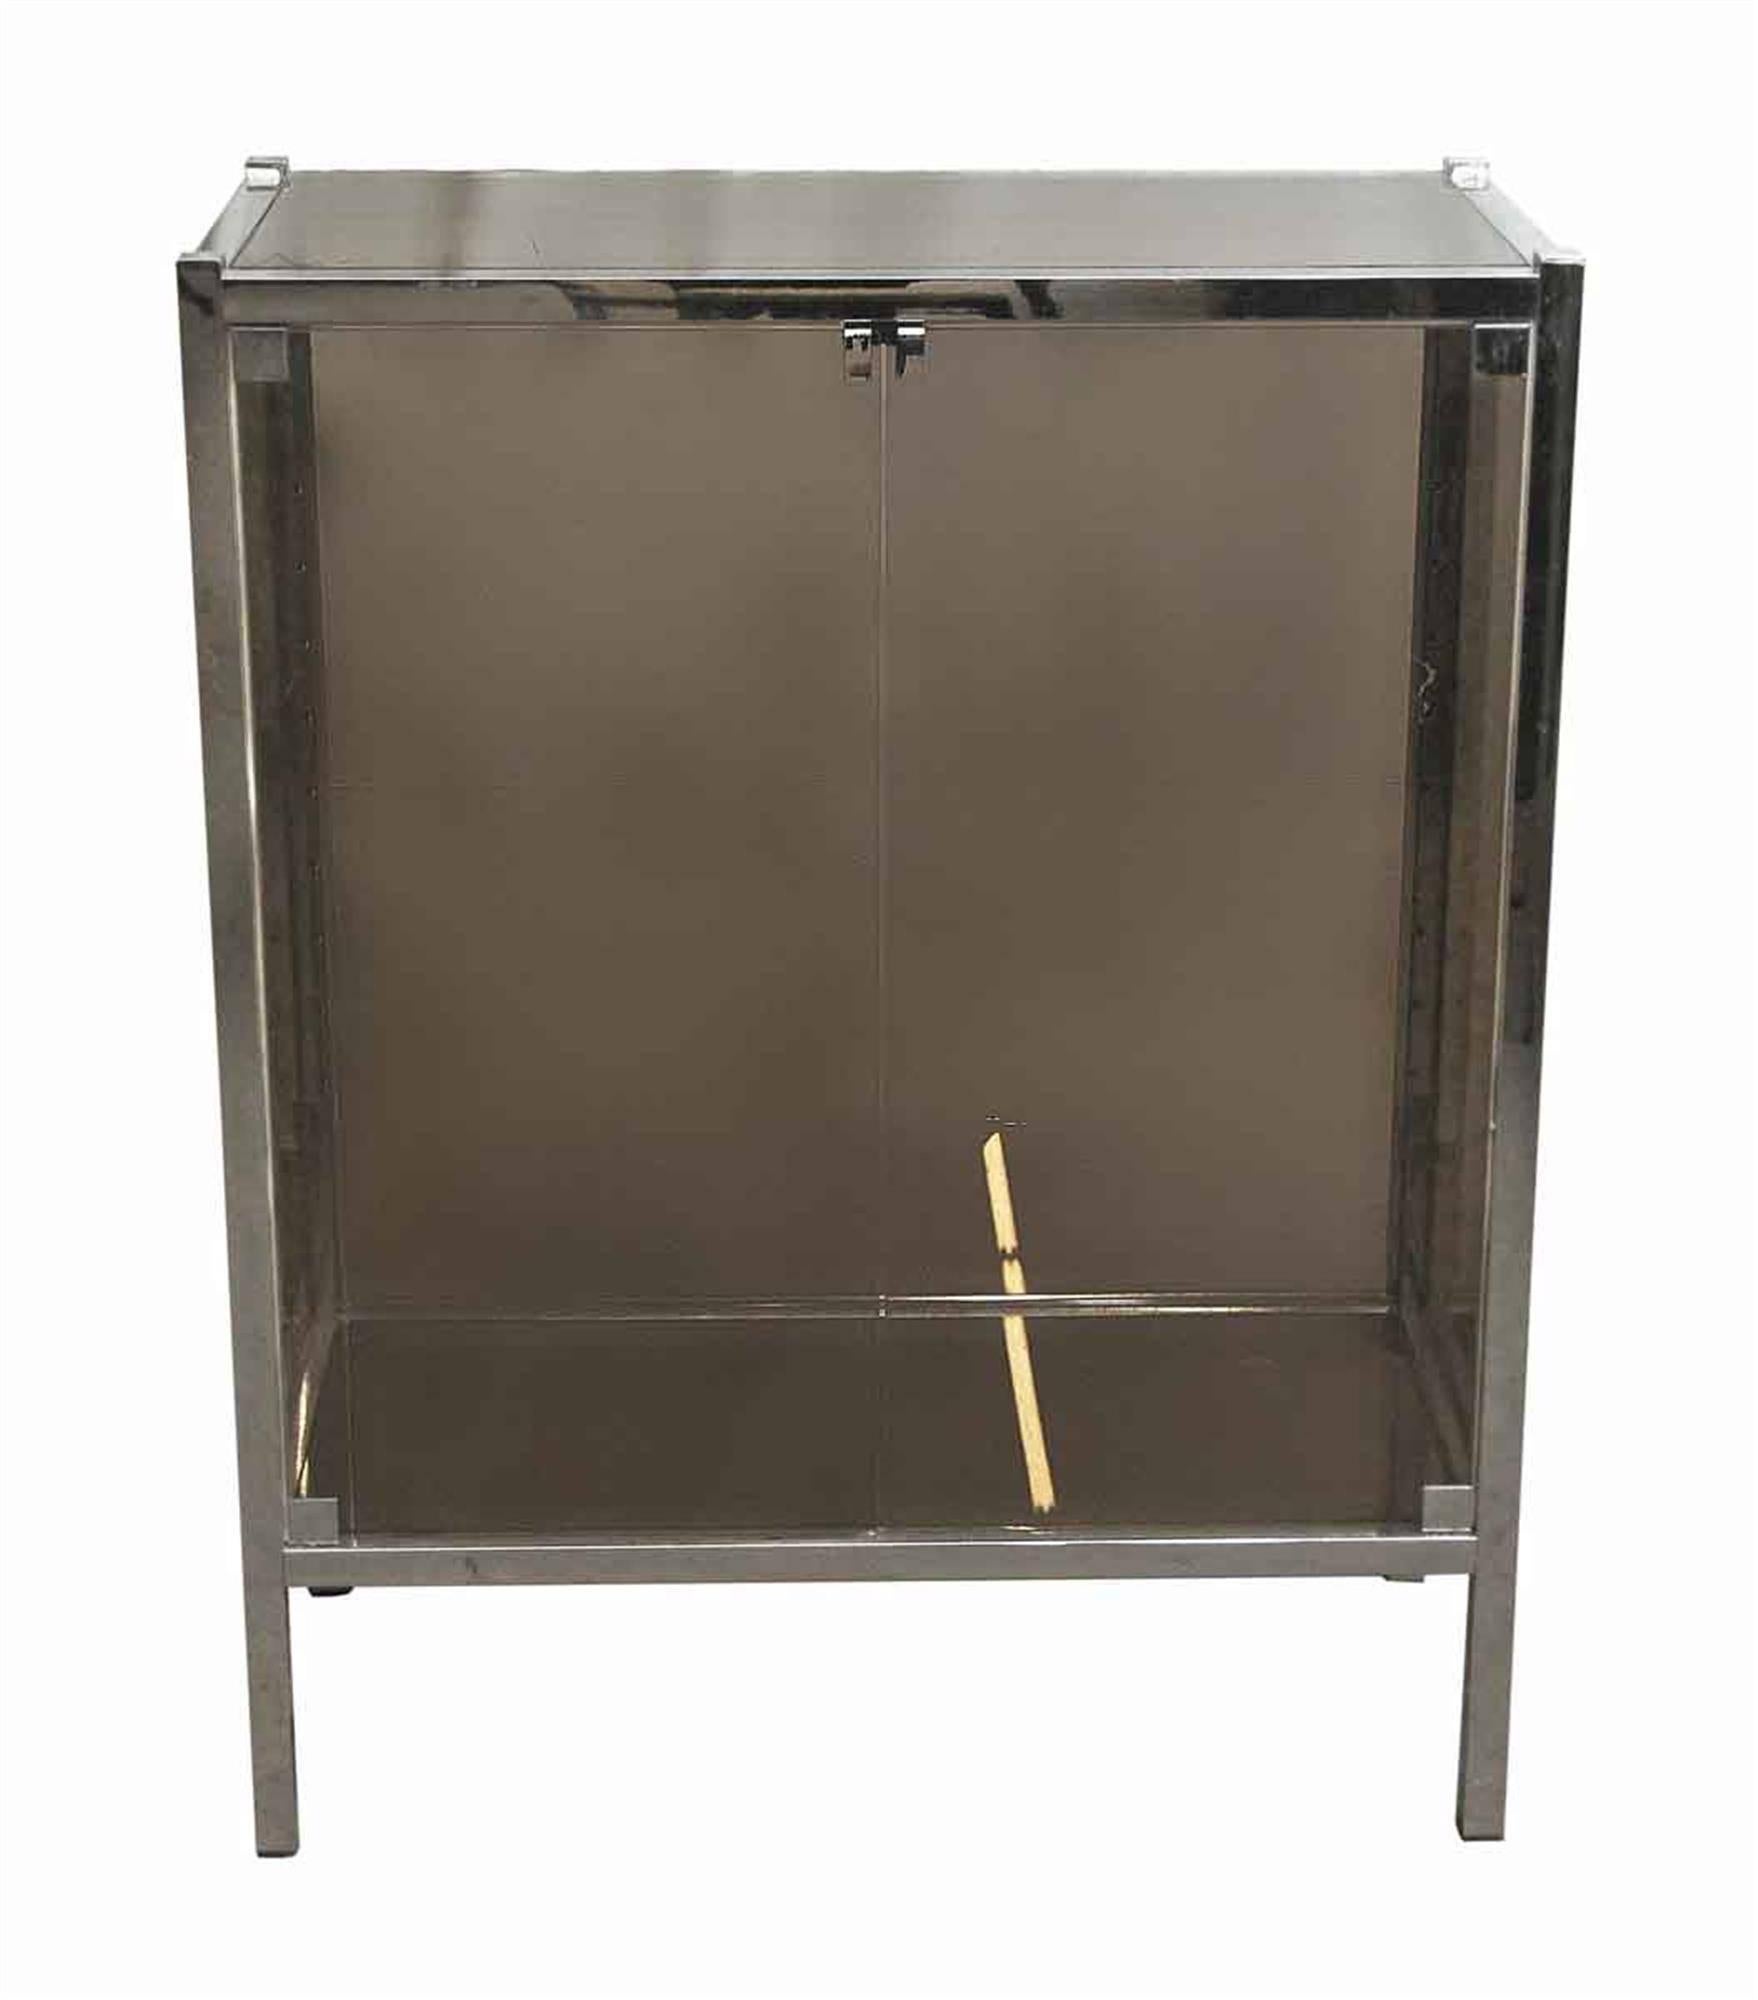 Mid-Century Modern French chrome display case with smoked colored glass, circa 1970s. This can be seen at our 400 Gilligan St location in Scranton, PA.